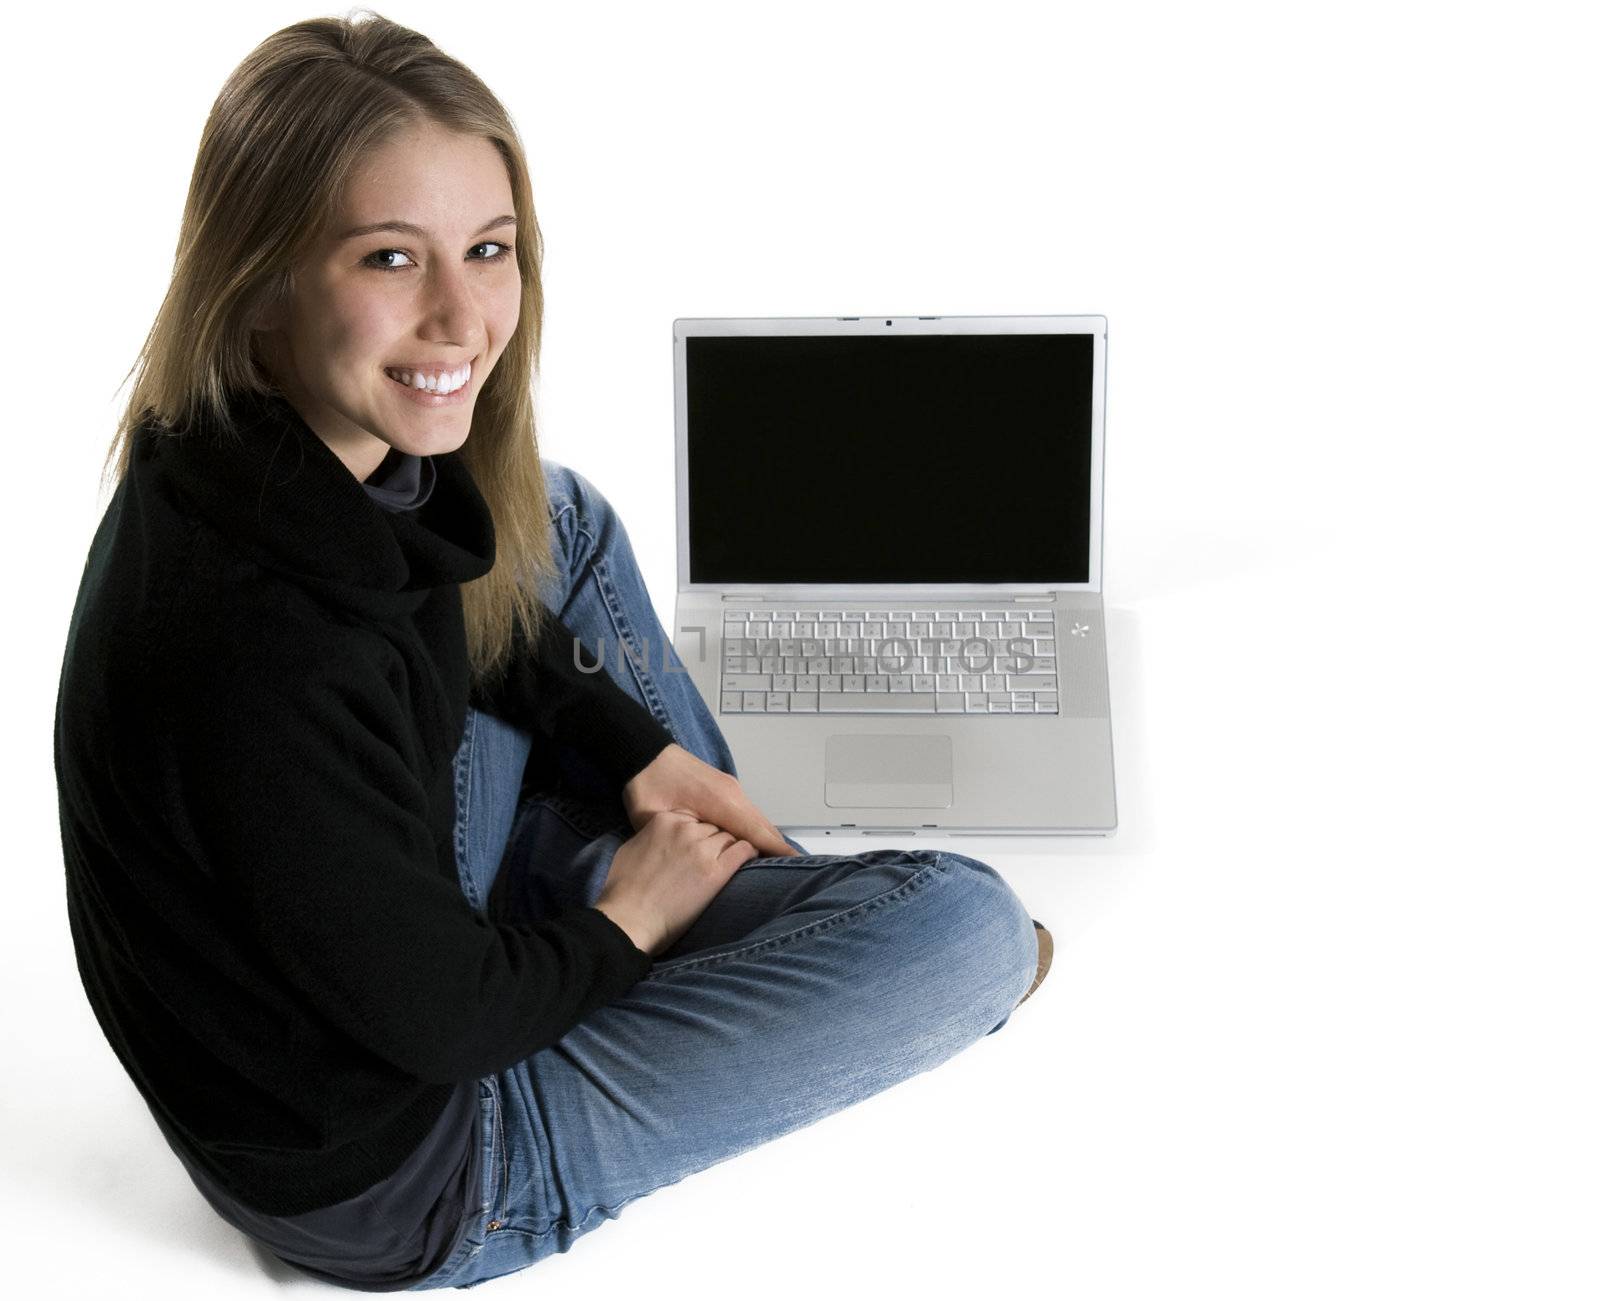 Smiling young woman in front of laptop.